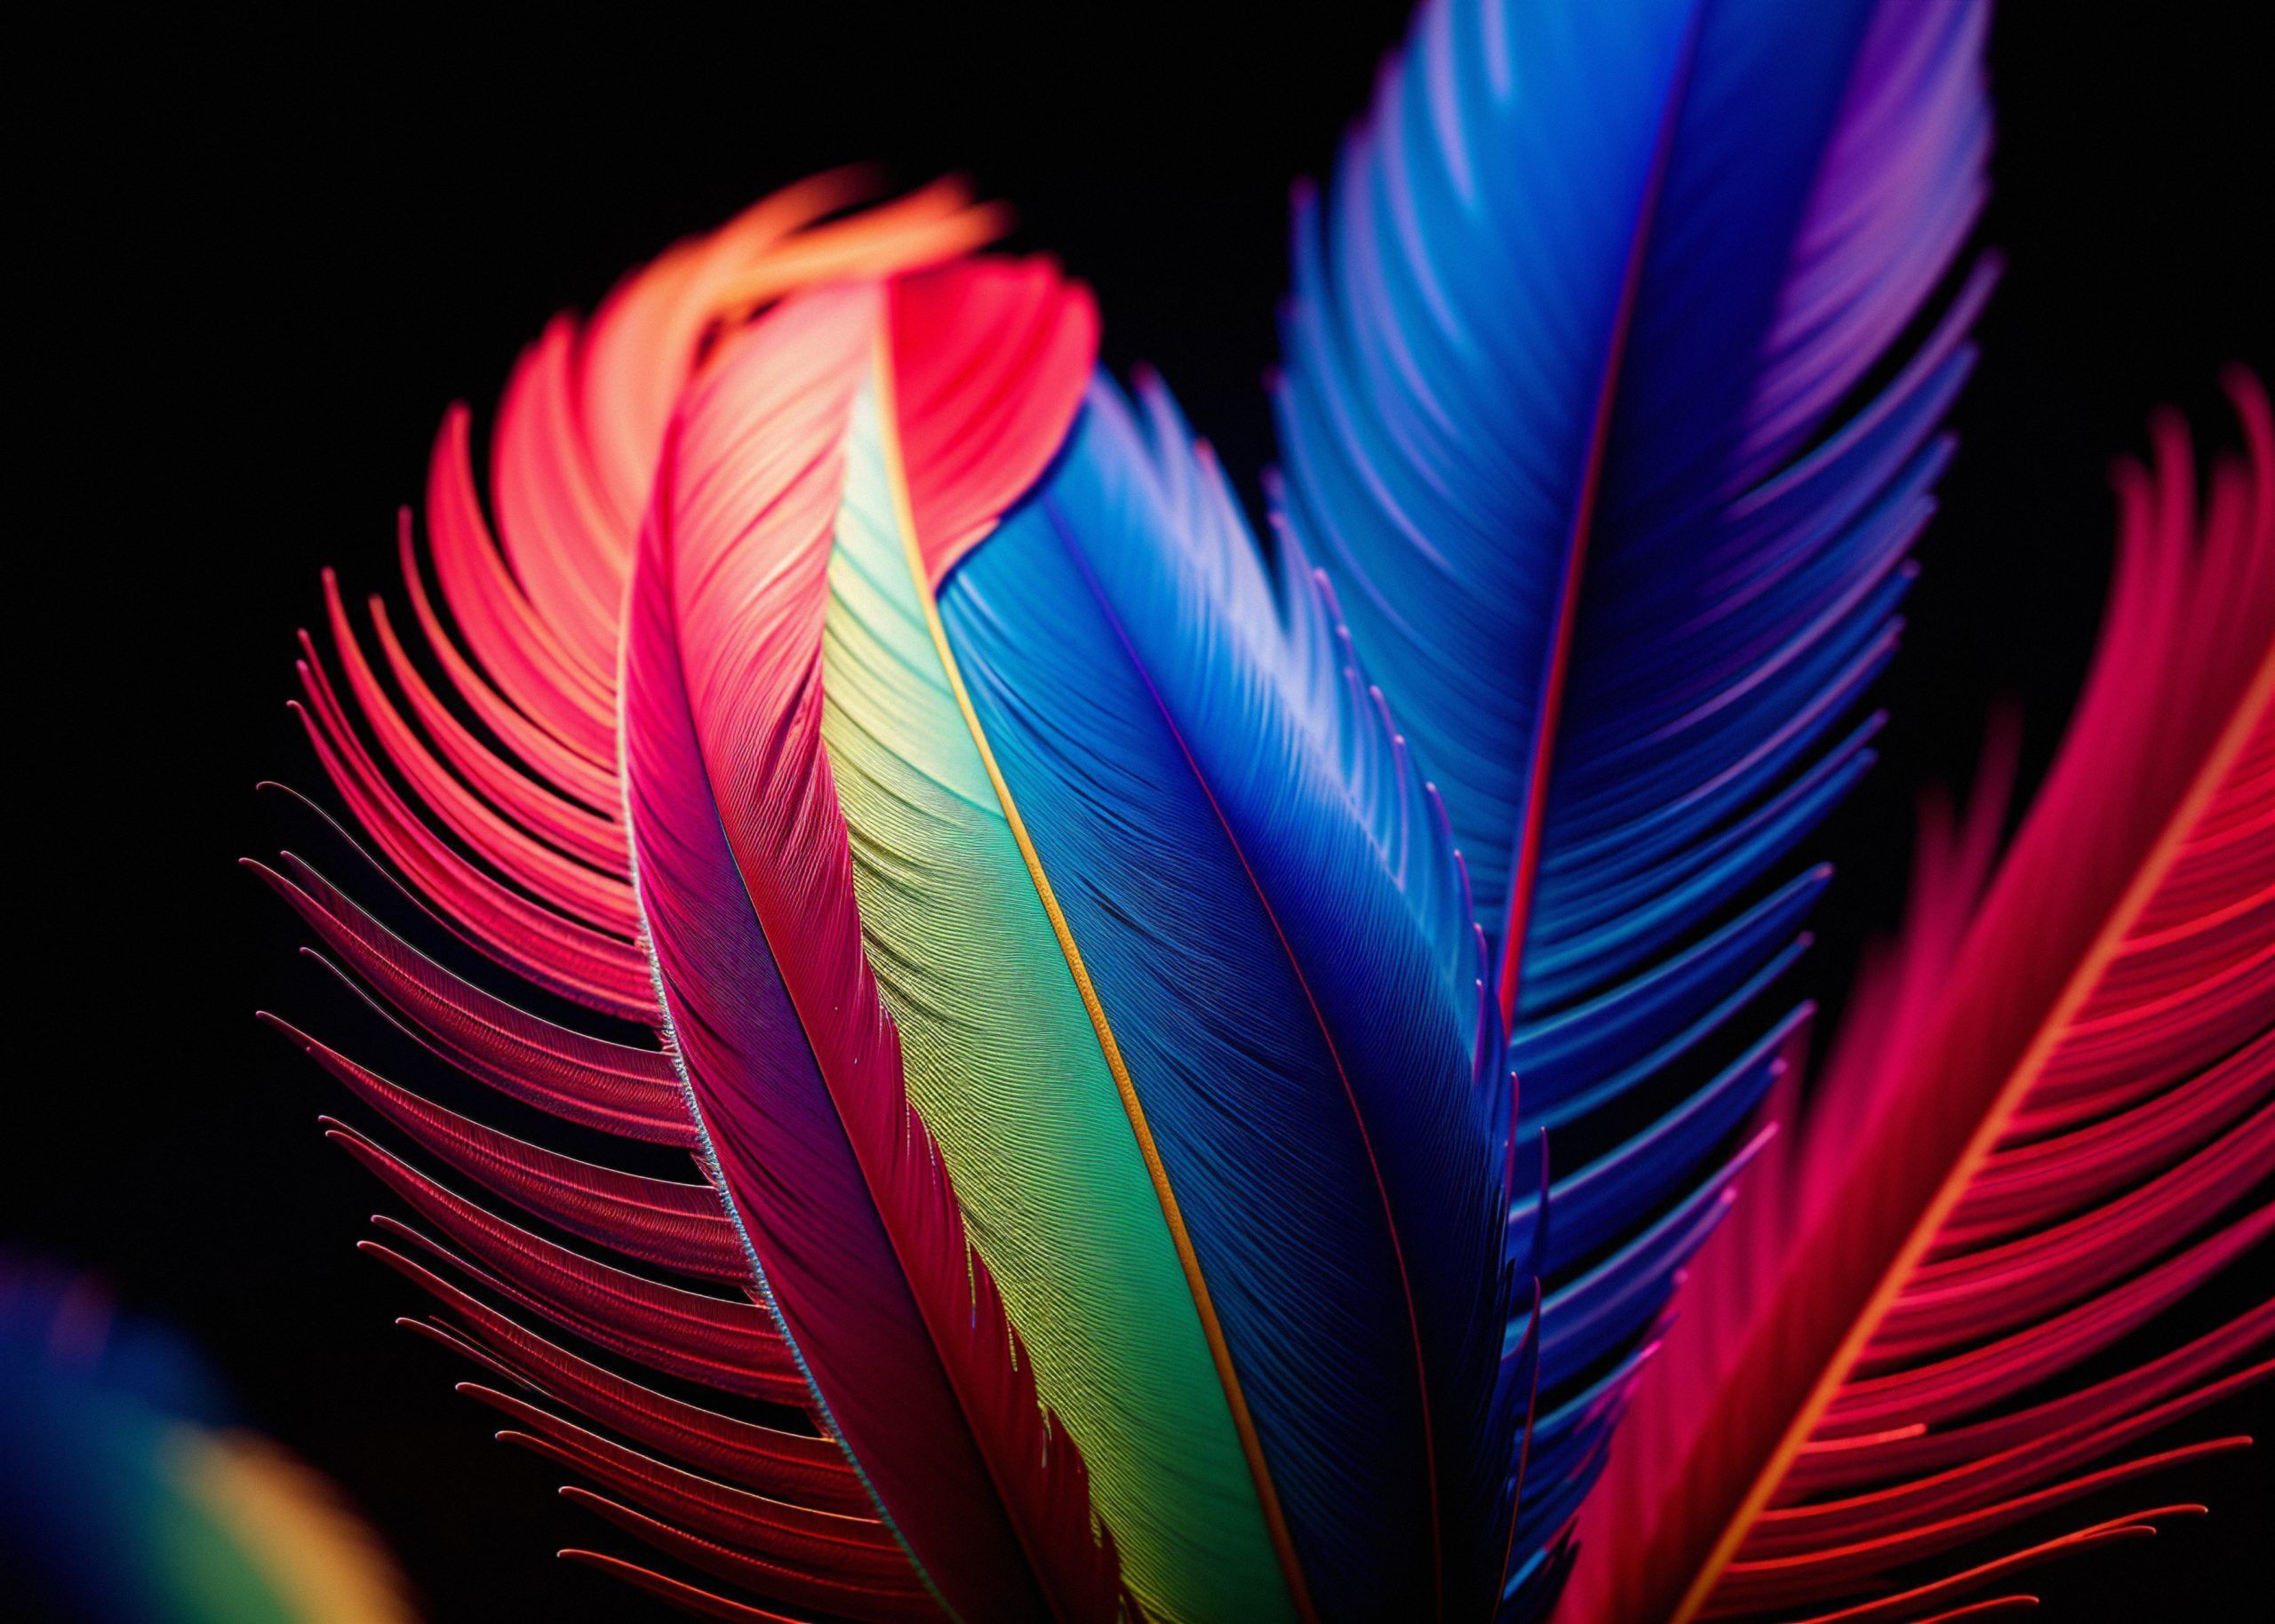 Four colorful feathers against a black background - Feathers